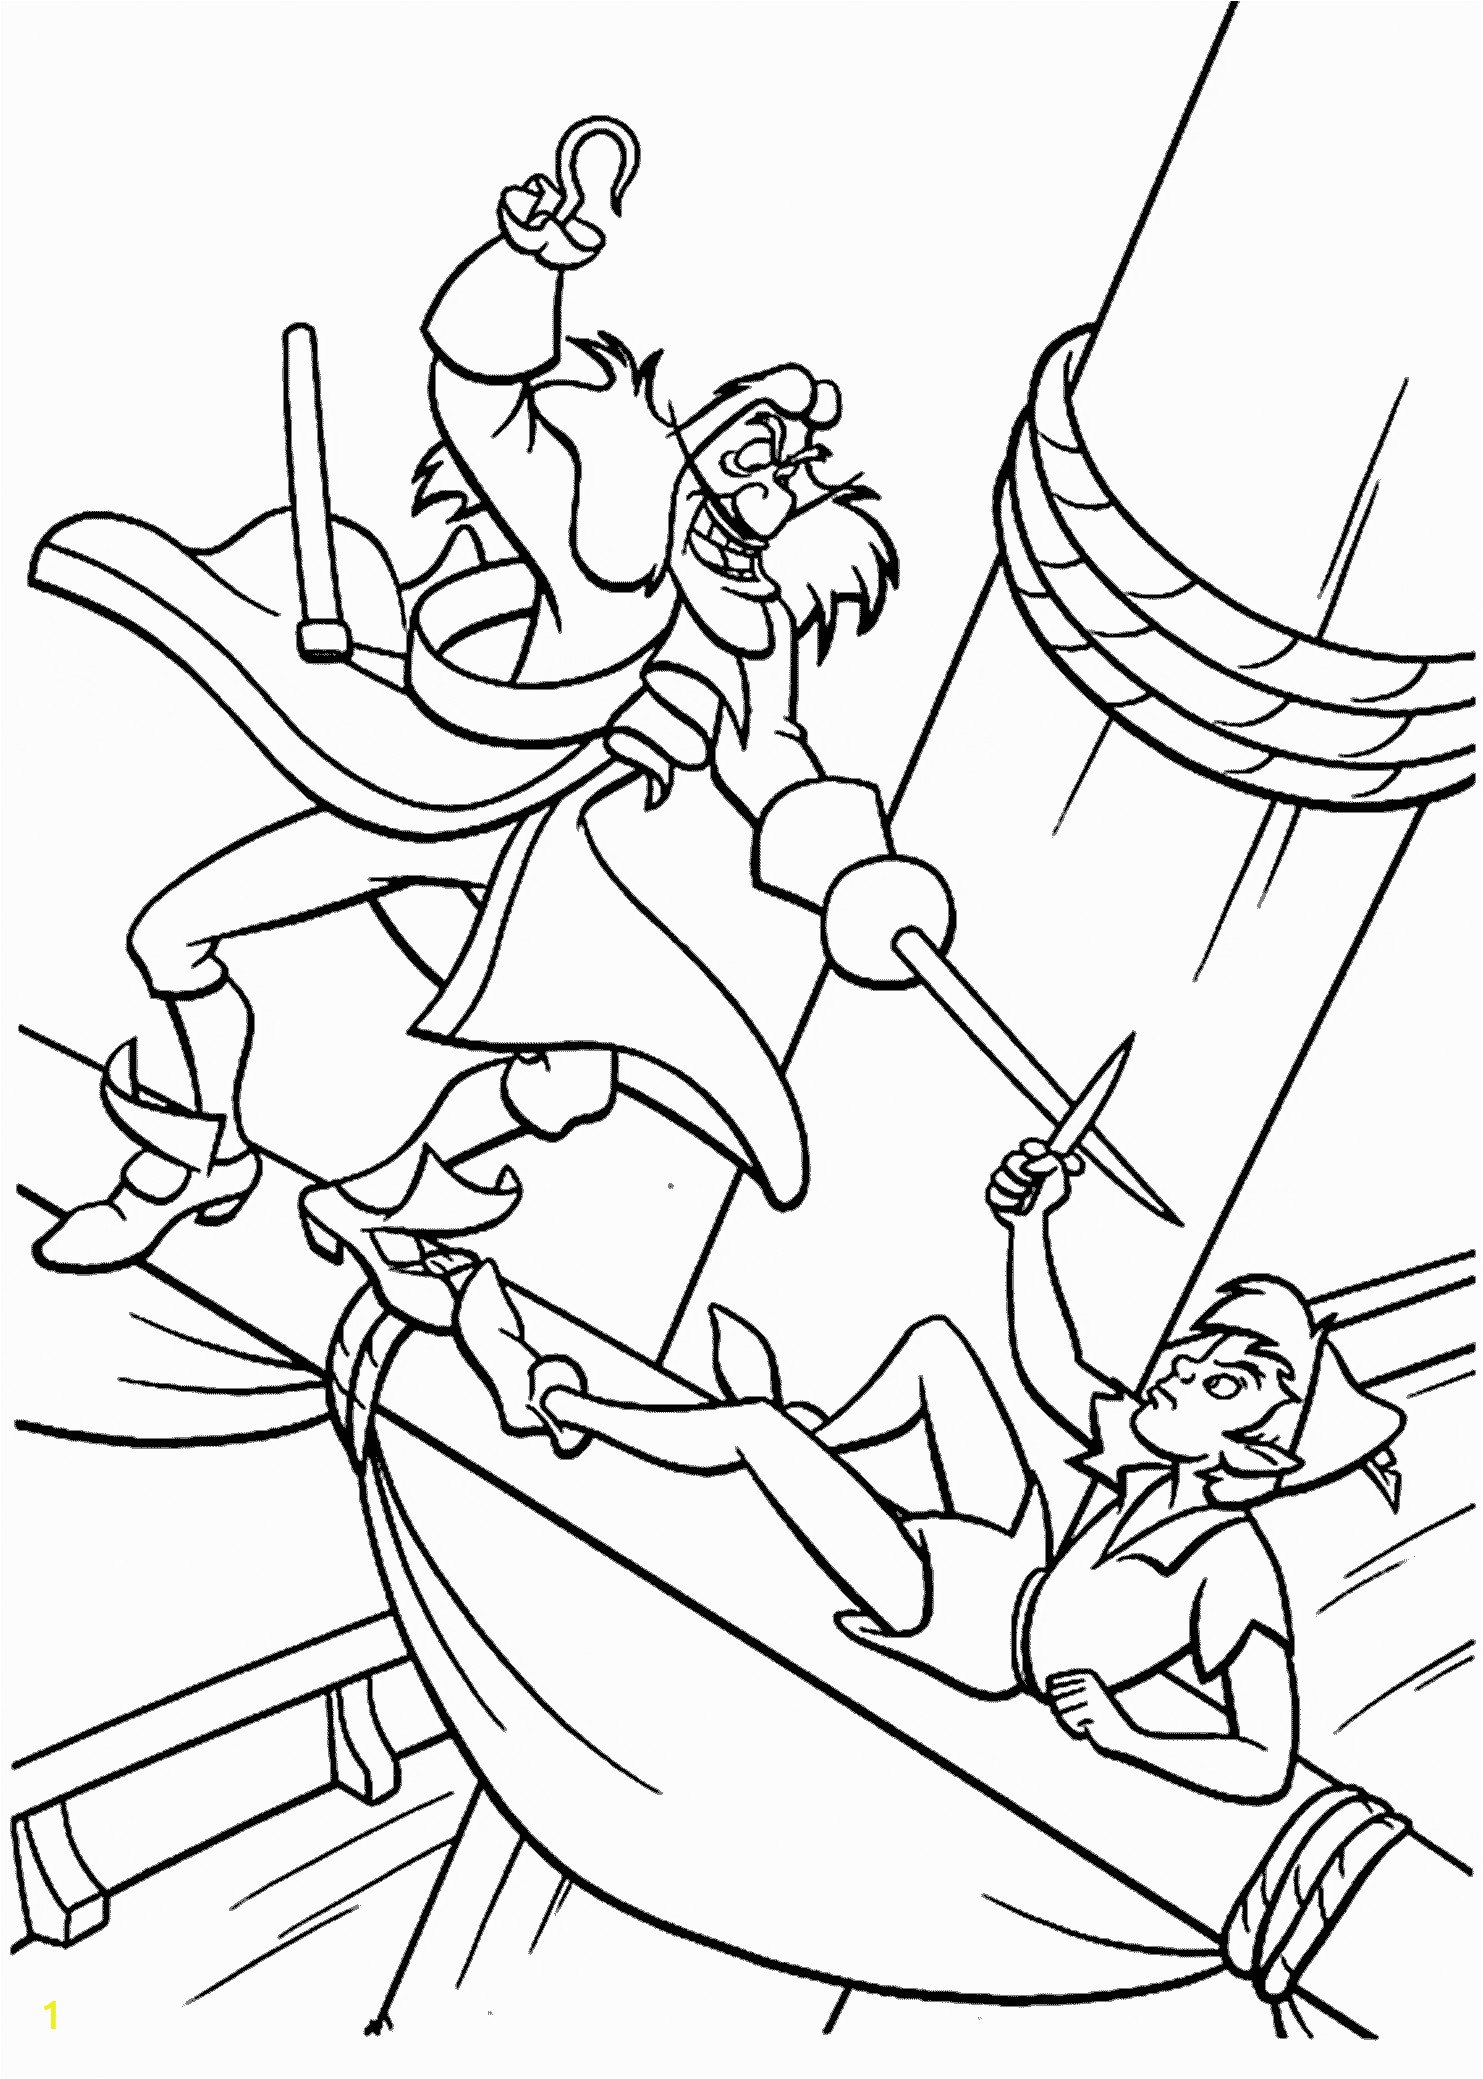 Disney Peter Pan Coloring Pages Free Peter Pan and Hook Coloring Pages for Kids Printable Free